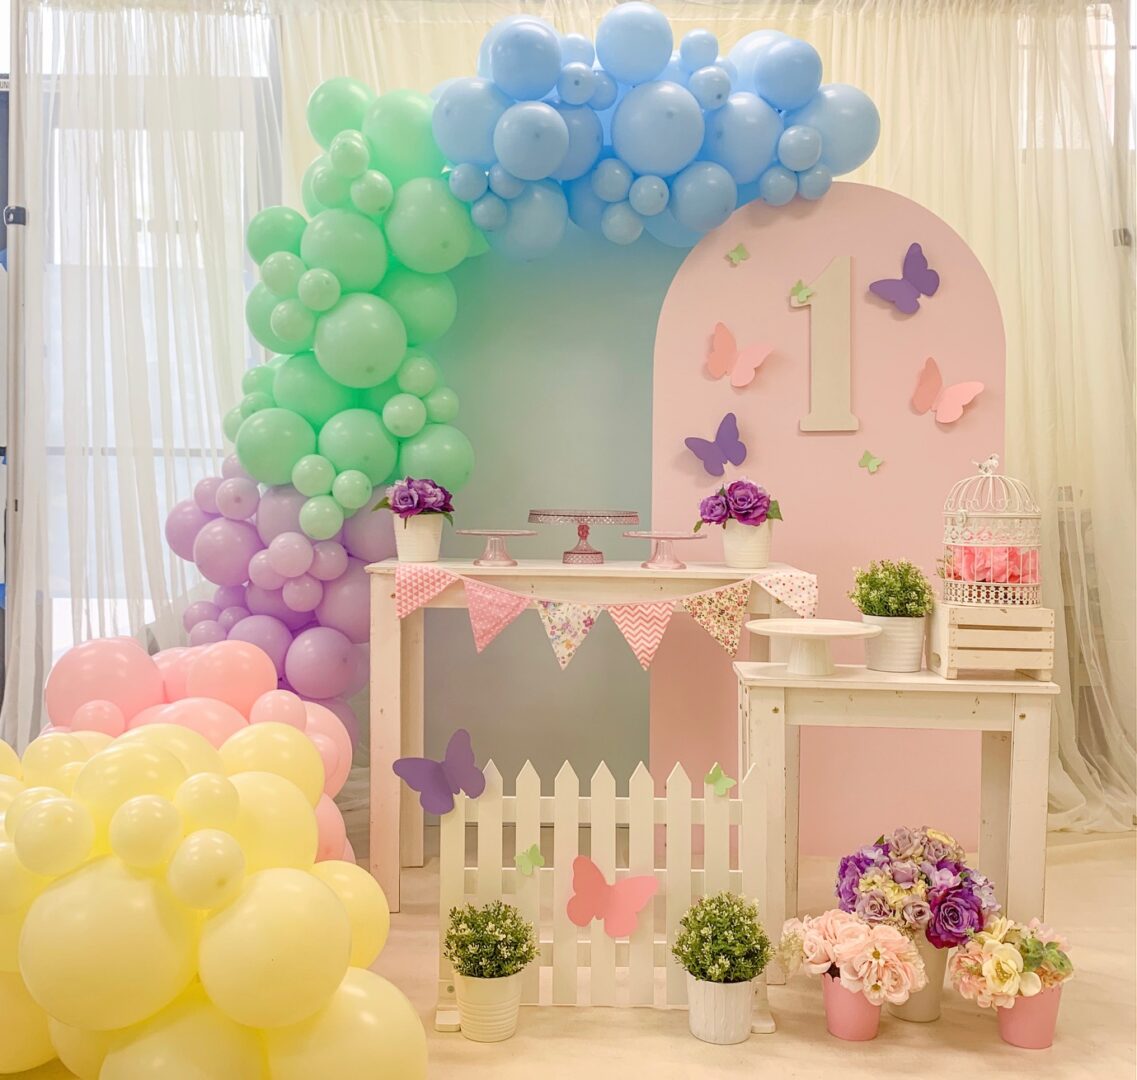 A room with balloons and flowers in it